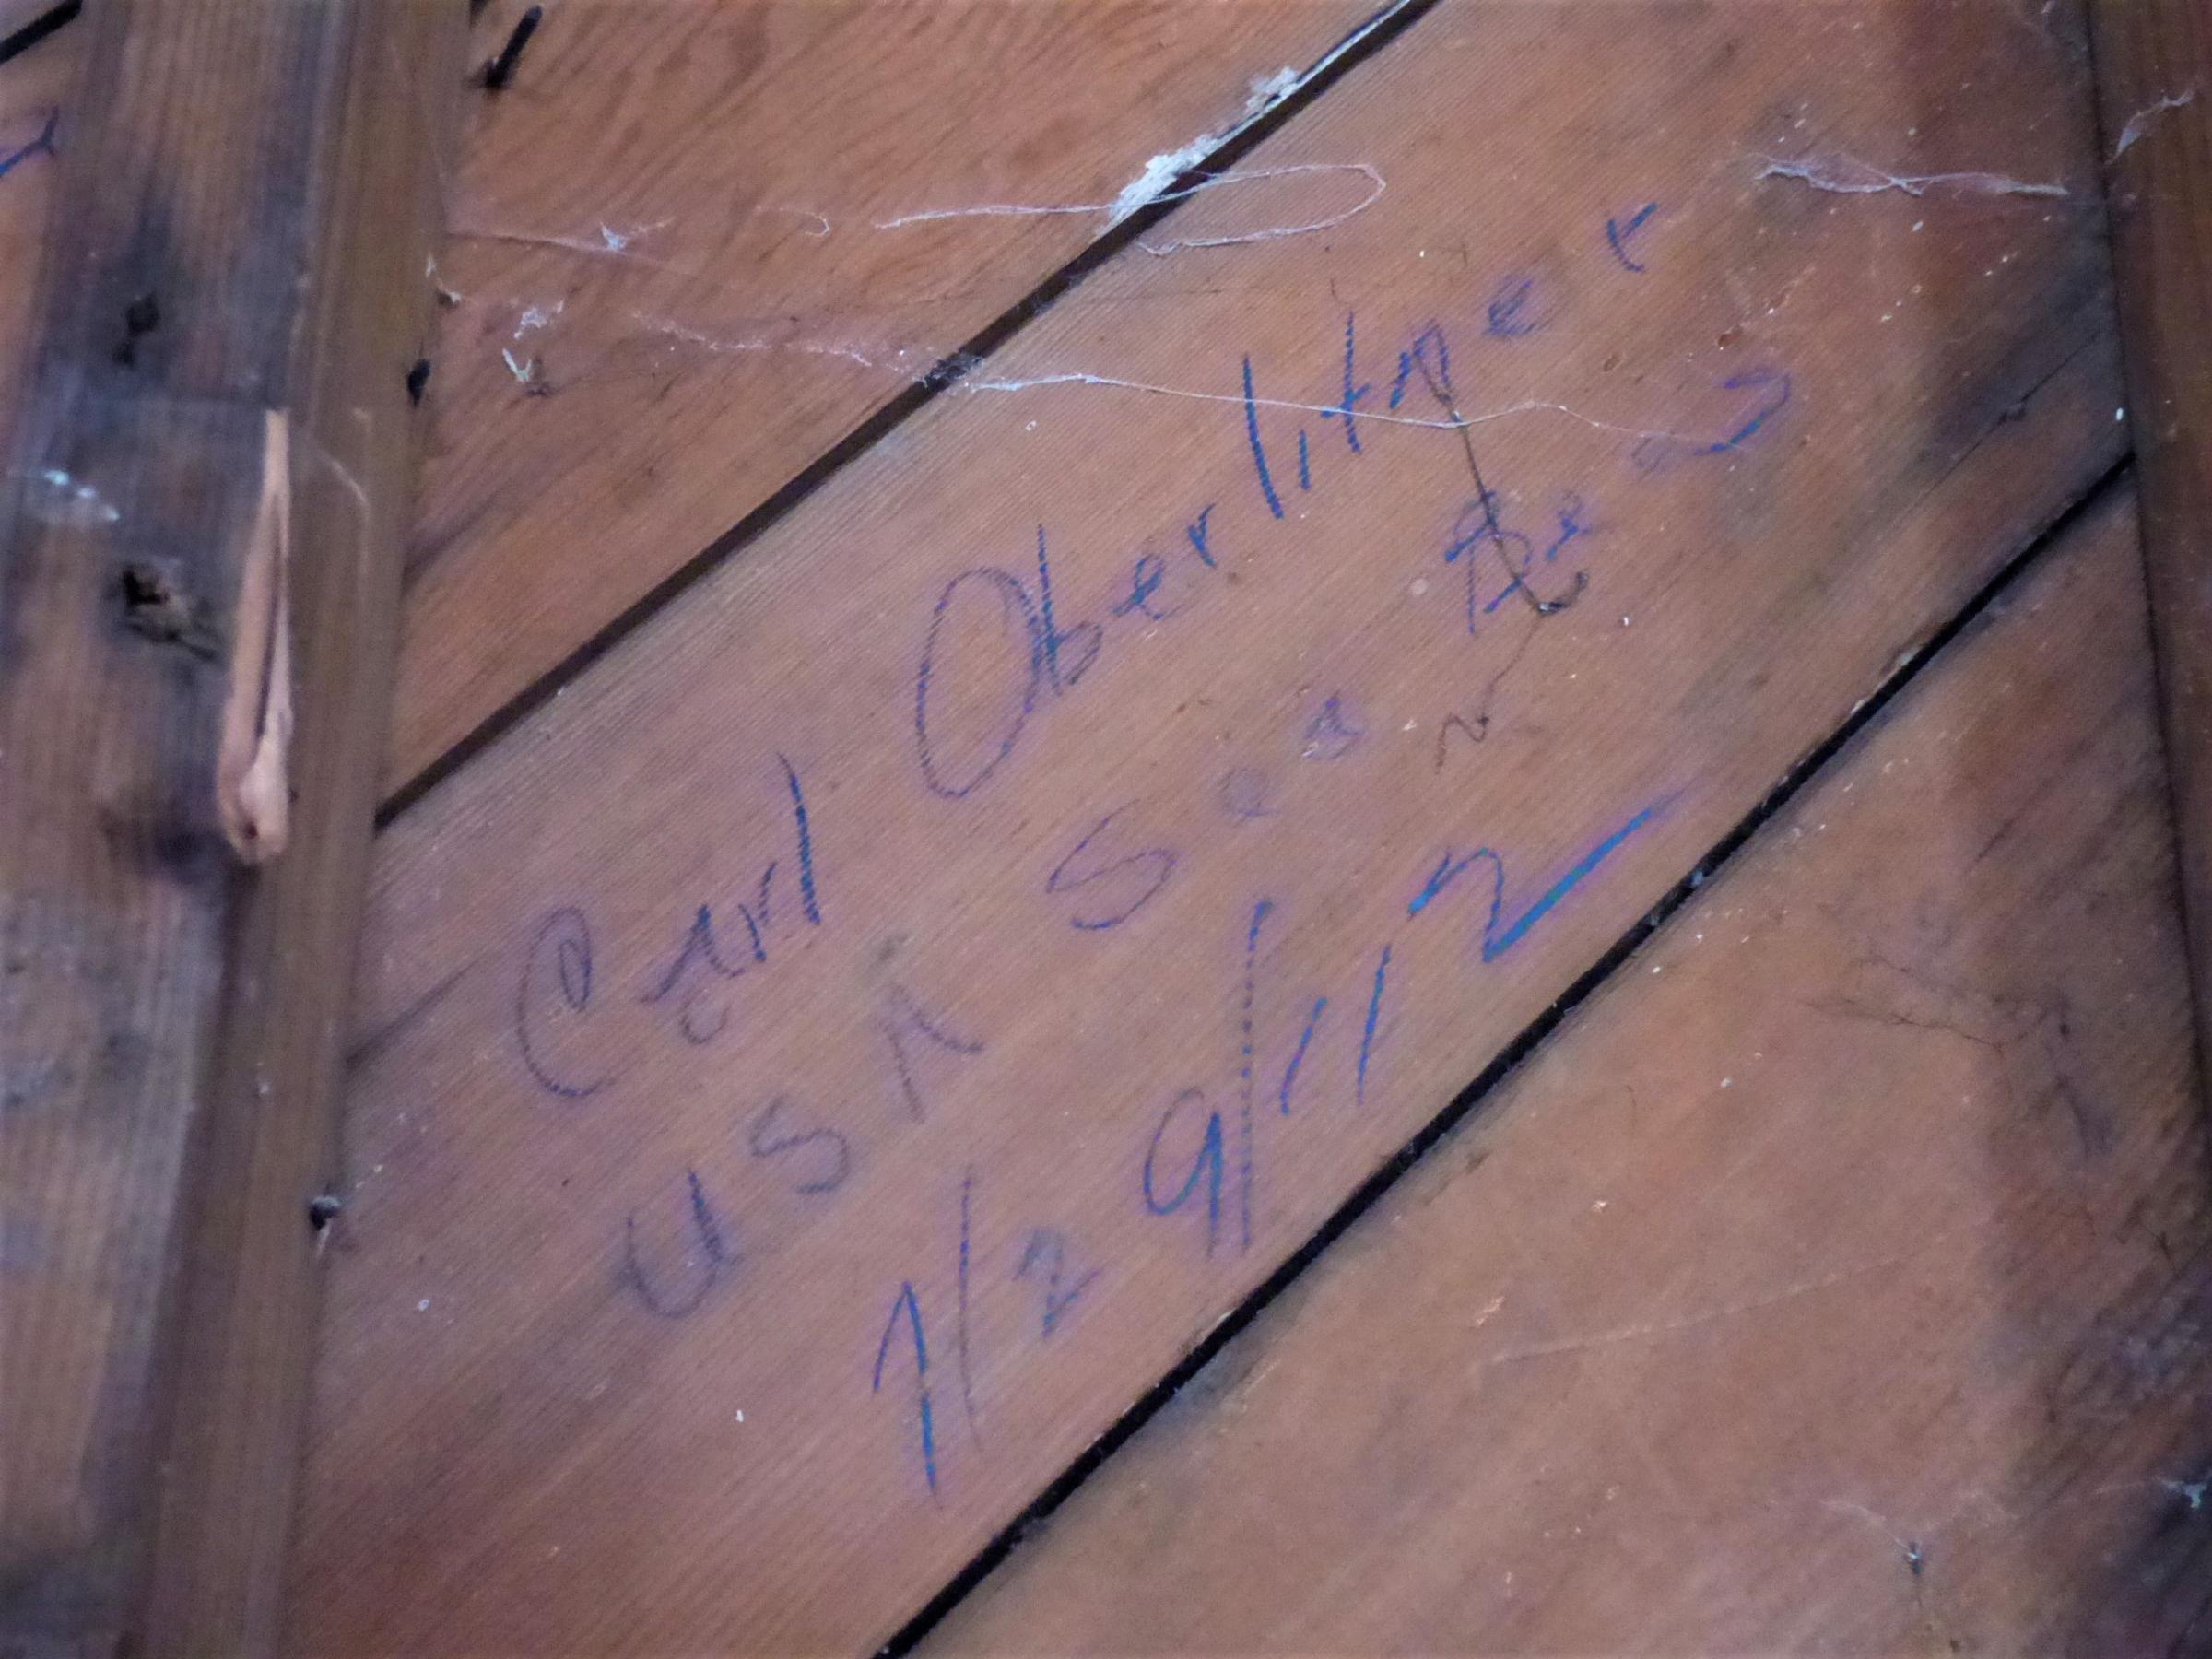 In another World War II building nearby, construction crews found this signature – “Carl Oberlitner, USA Seabee, 7/29/42” – behind mold and drywall. (Photo by Laura Kraegel/KUCB)